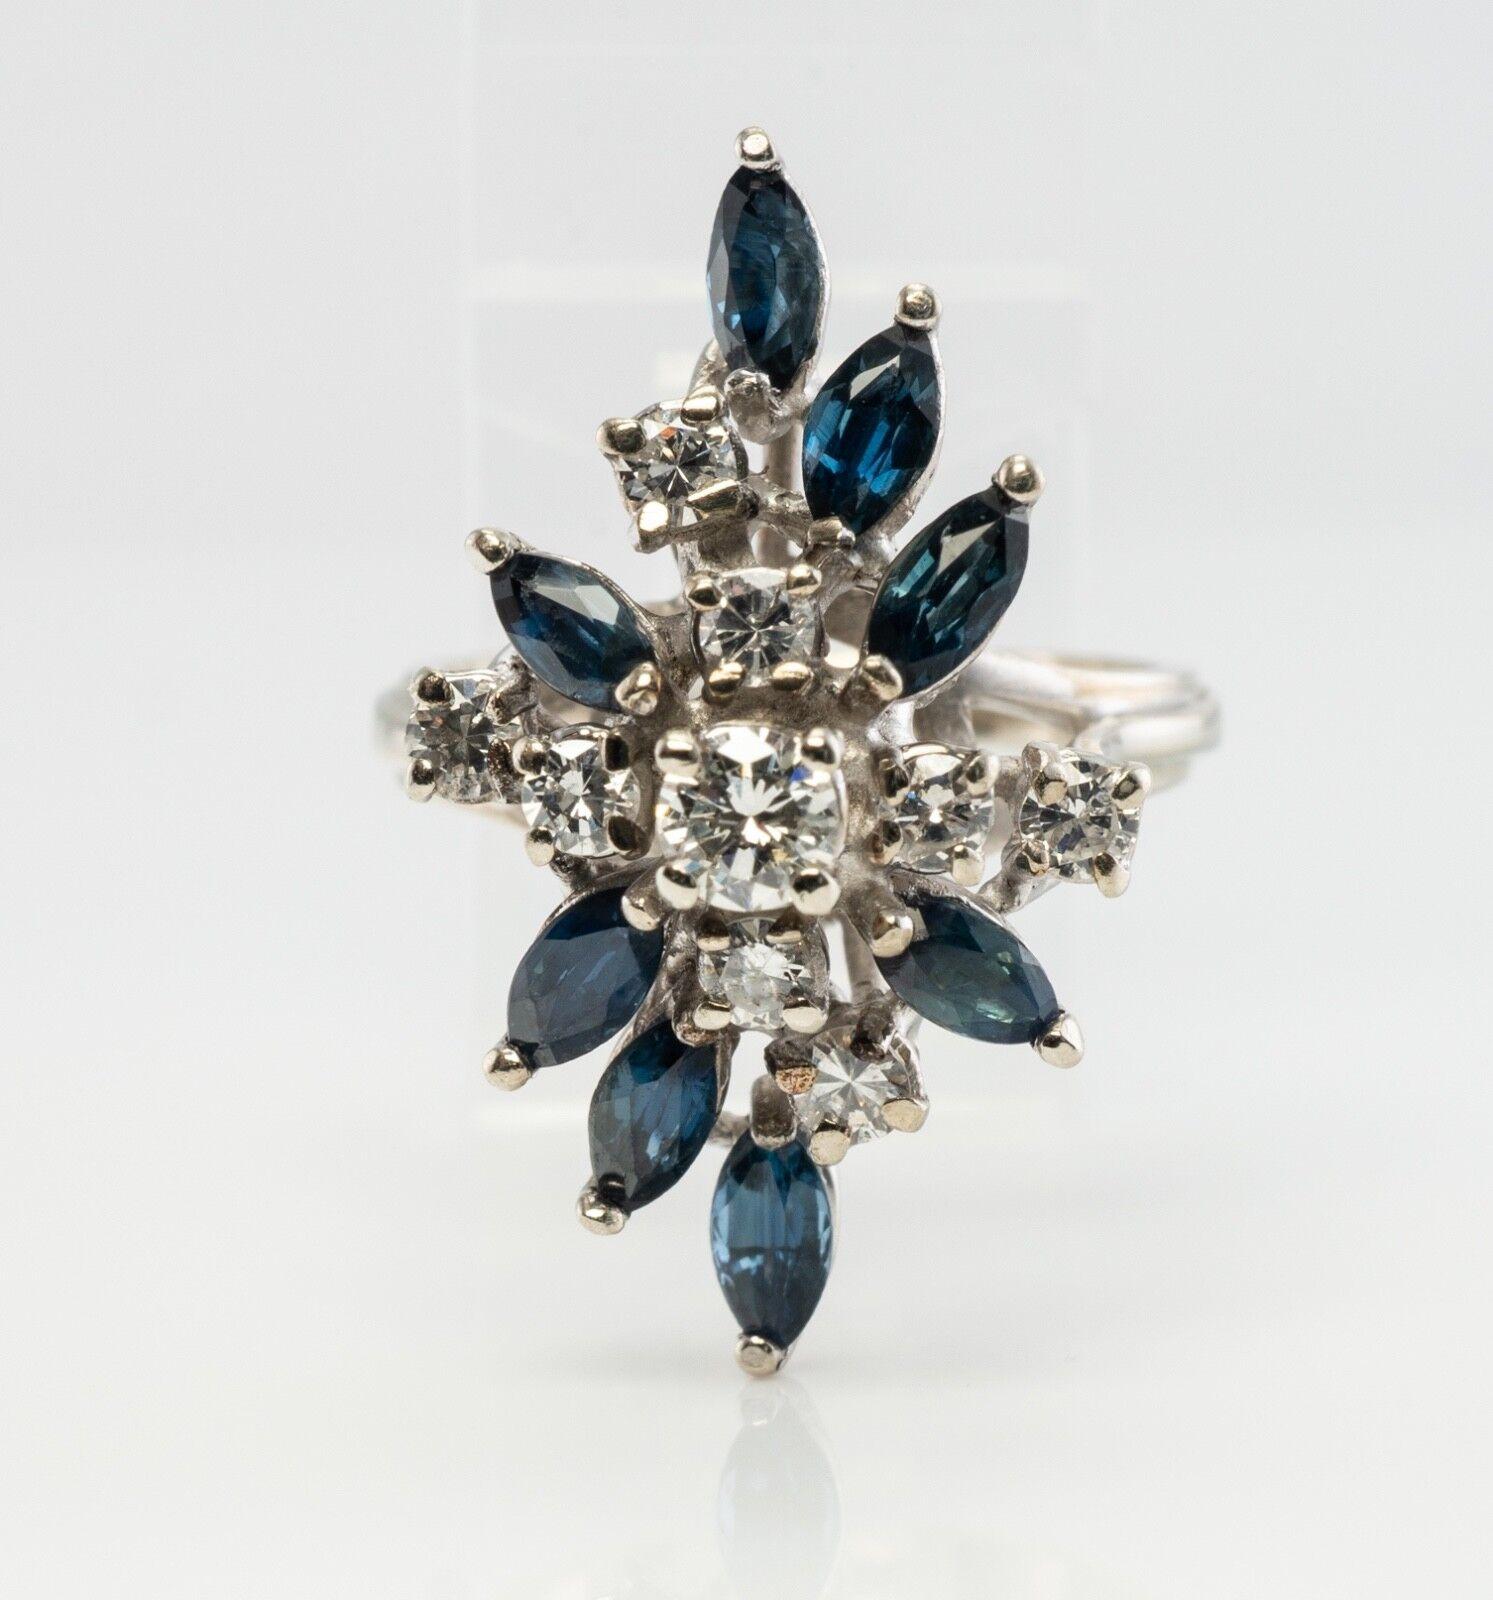 This beautiful vintage ring is finely crafted in solid 14K White gold and set with genuine Earth mined Sapphires and diamonds. Eight marquise cut Sapphires measure 4mm x 2mm each for the total 1.04 carats. These gems are very clean and transparent,